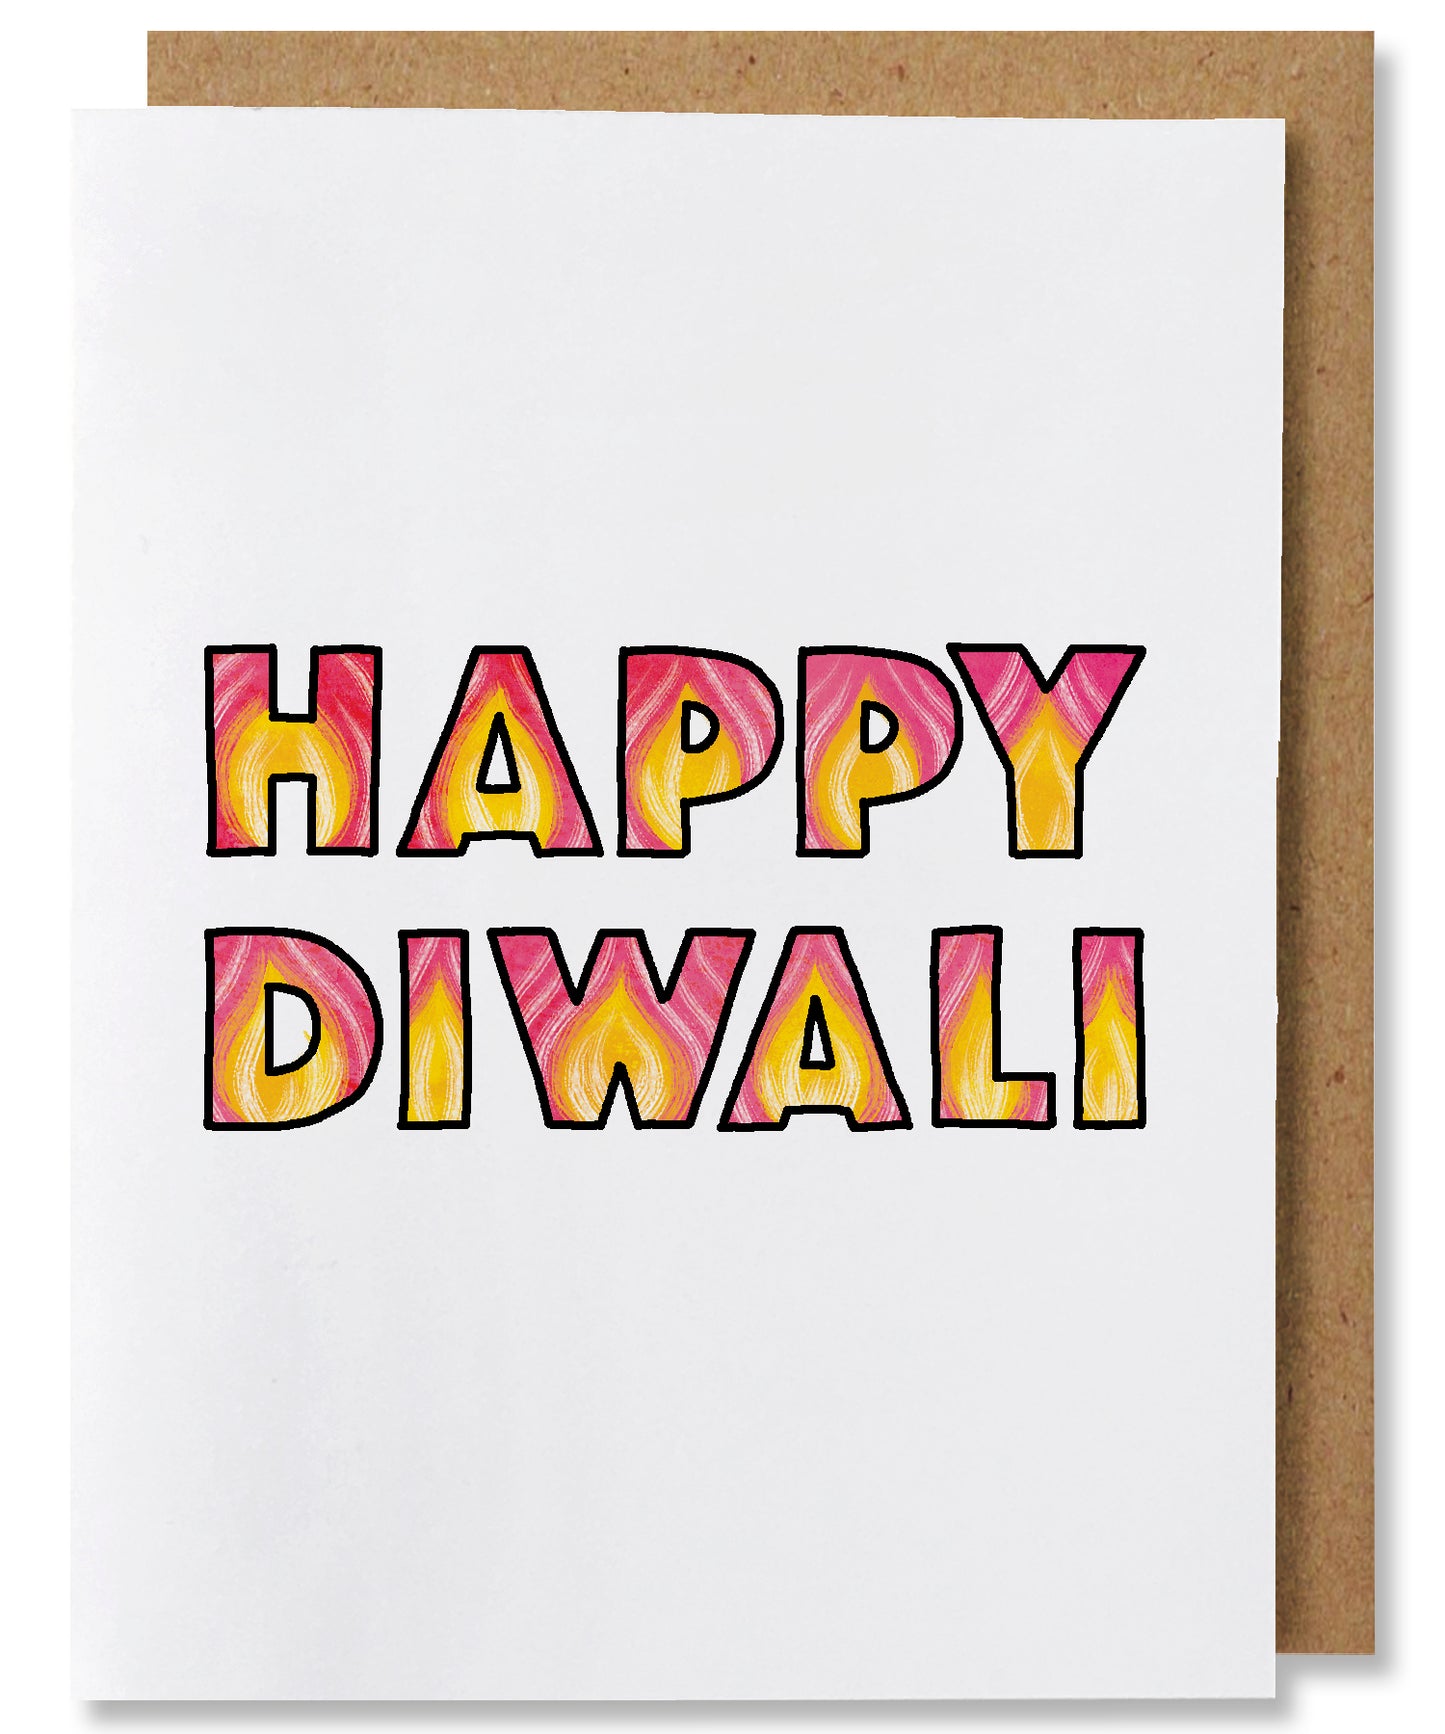 Happy Diwali - Illustrated Typography Holiday Card